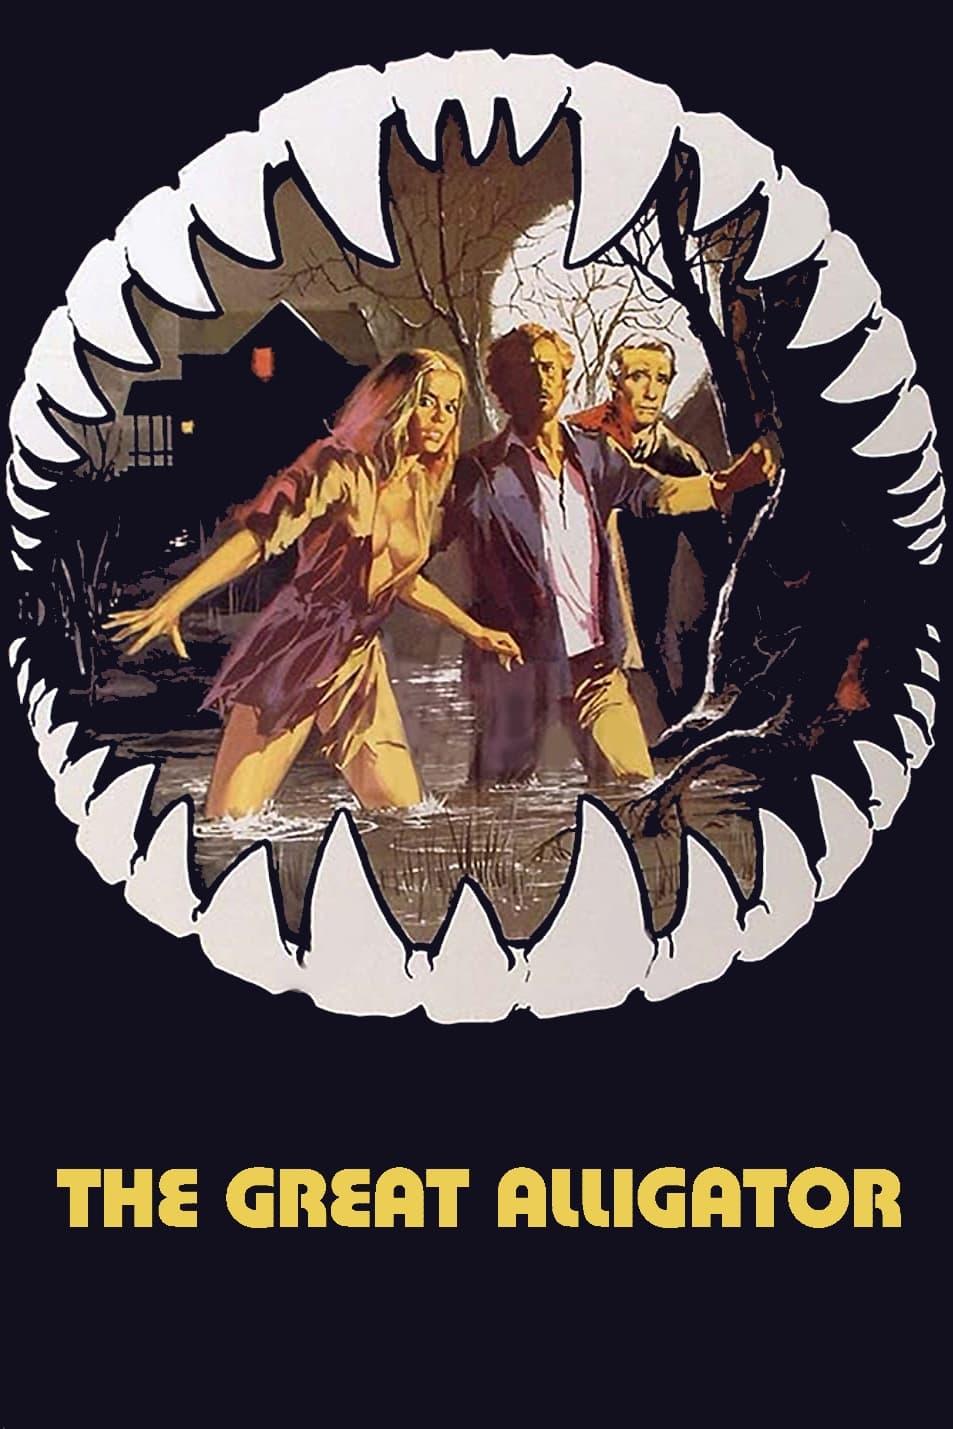 The Great Alligator poster